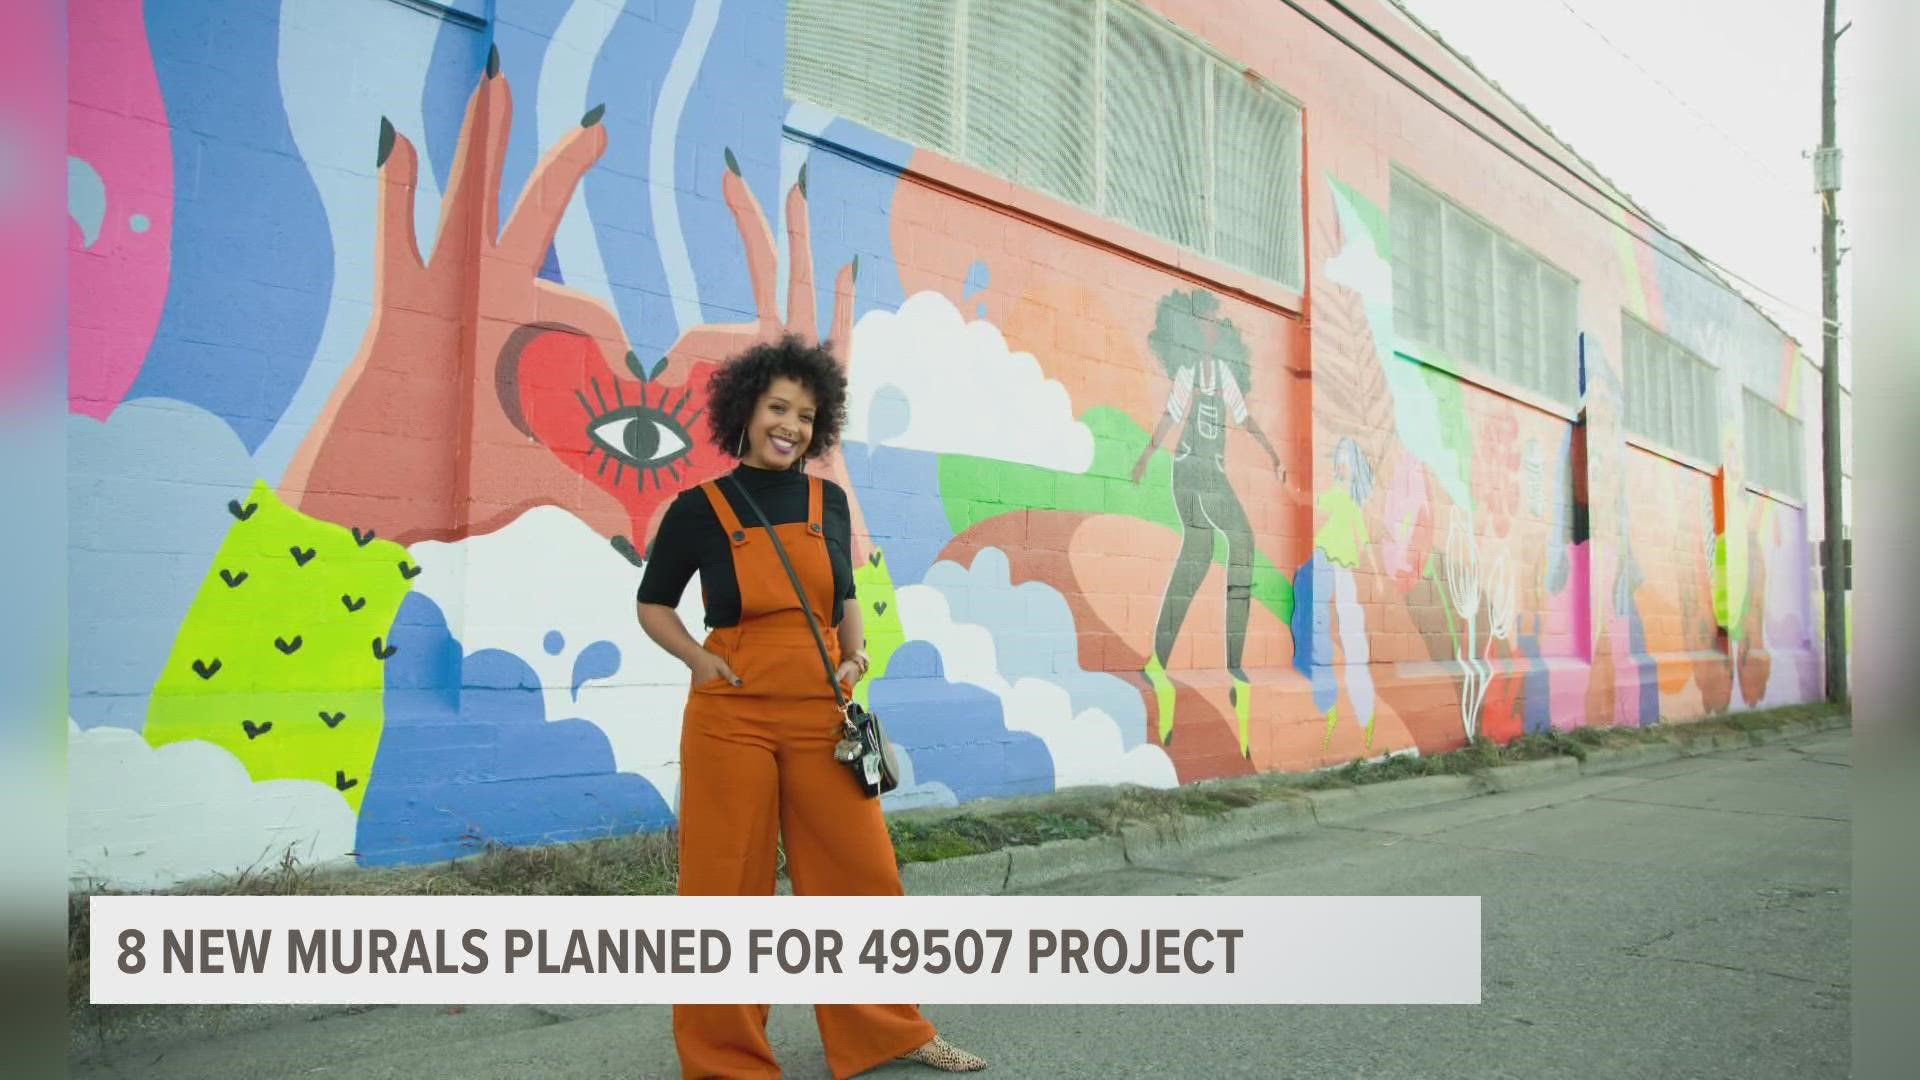 The art project aims to change the narrative about the city’s southside and reclaim the 49507 zip code.